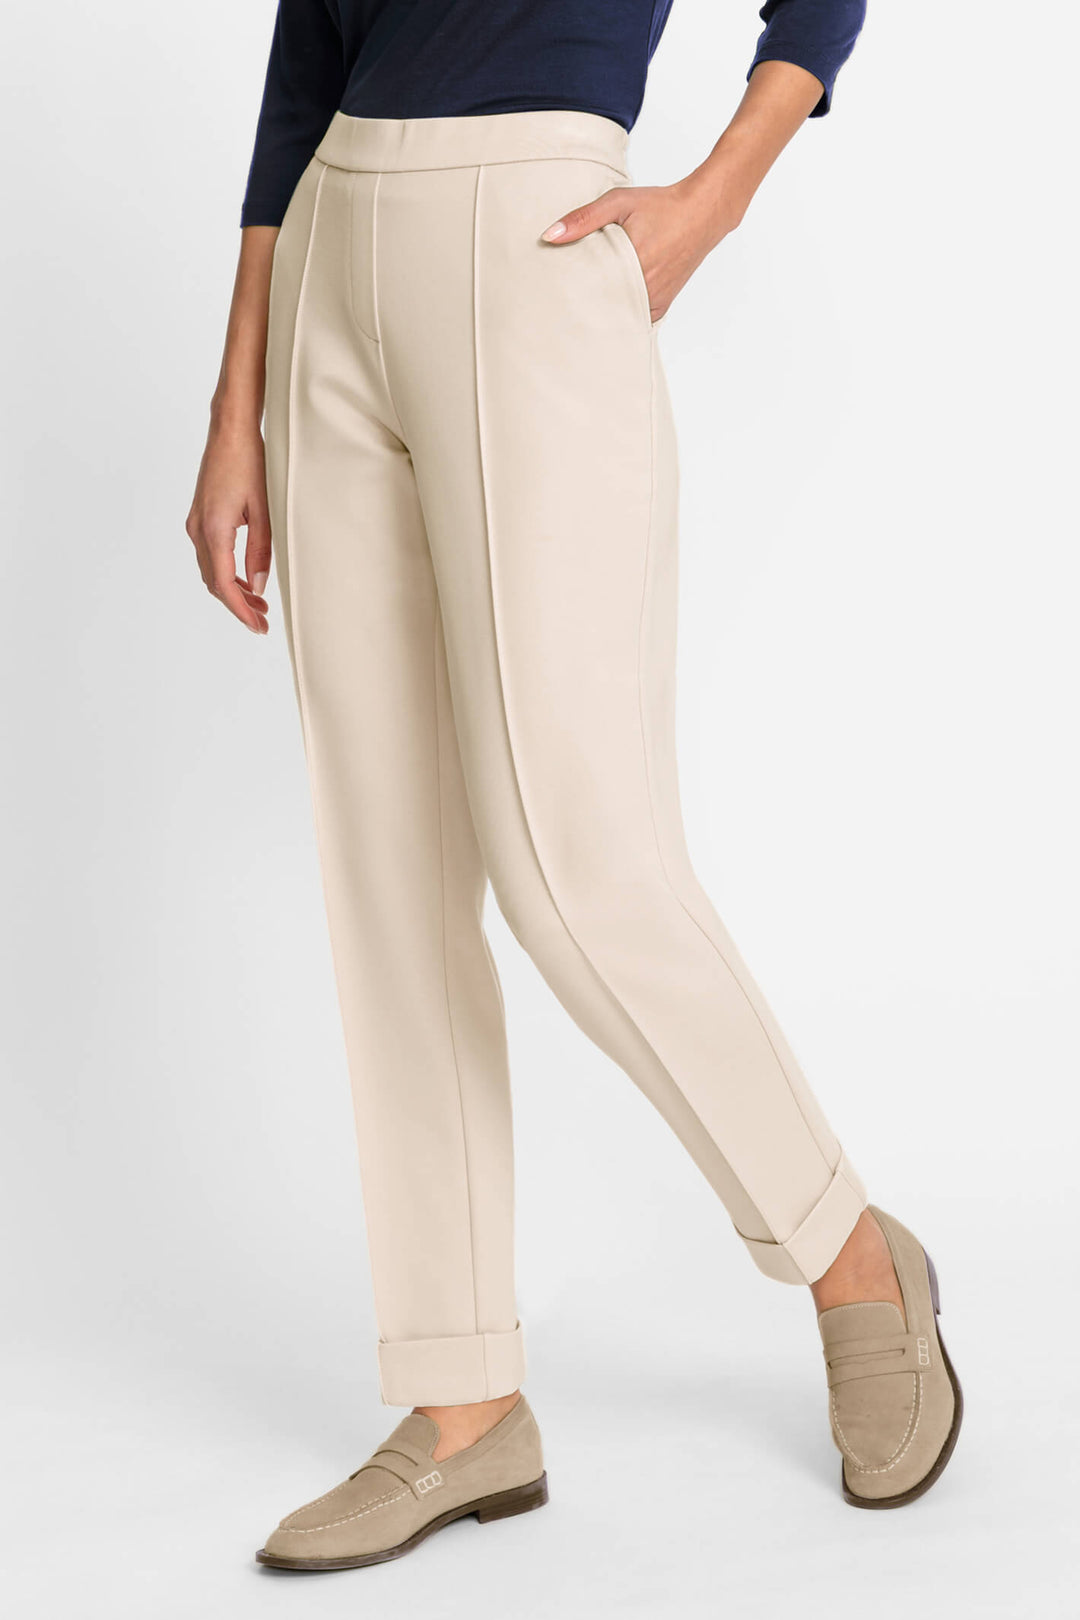 Olsen 14002105 Cream Pull-On Trousers - Experience Boutique